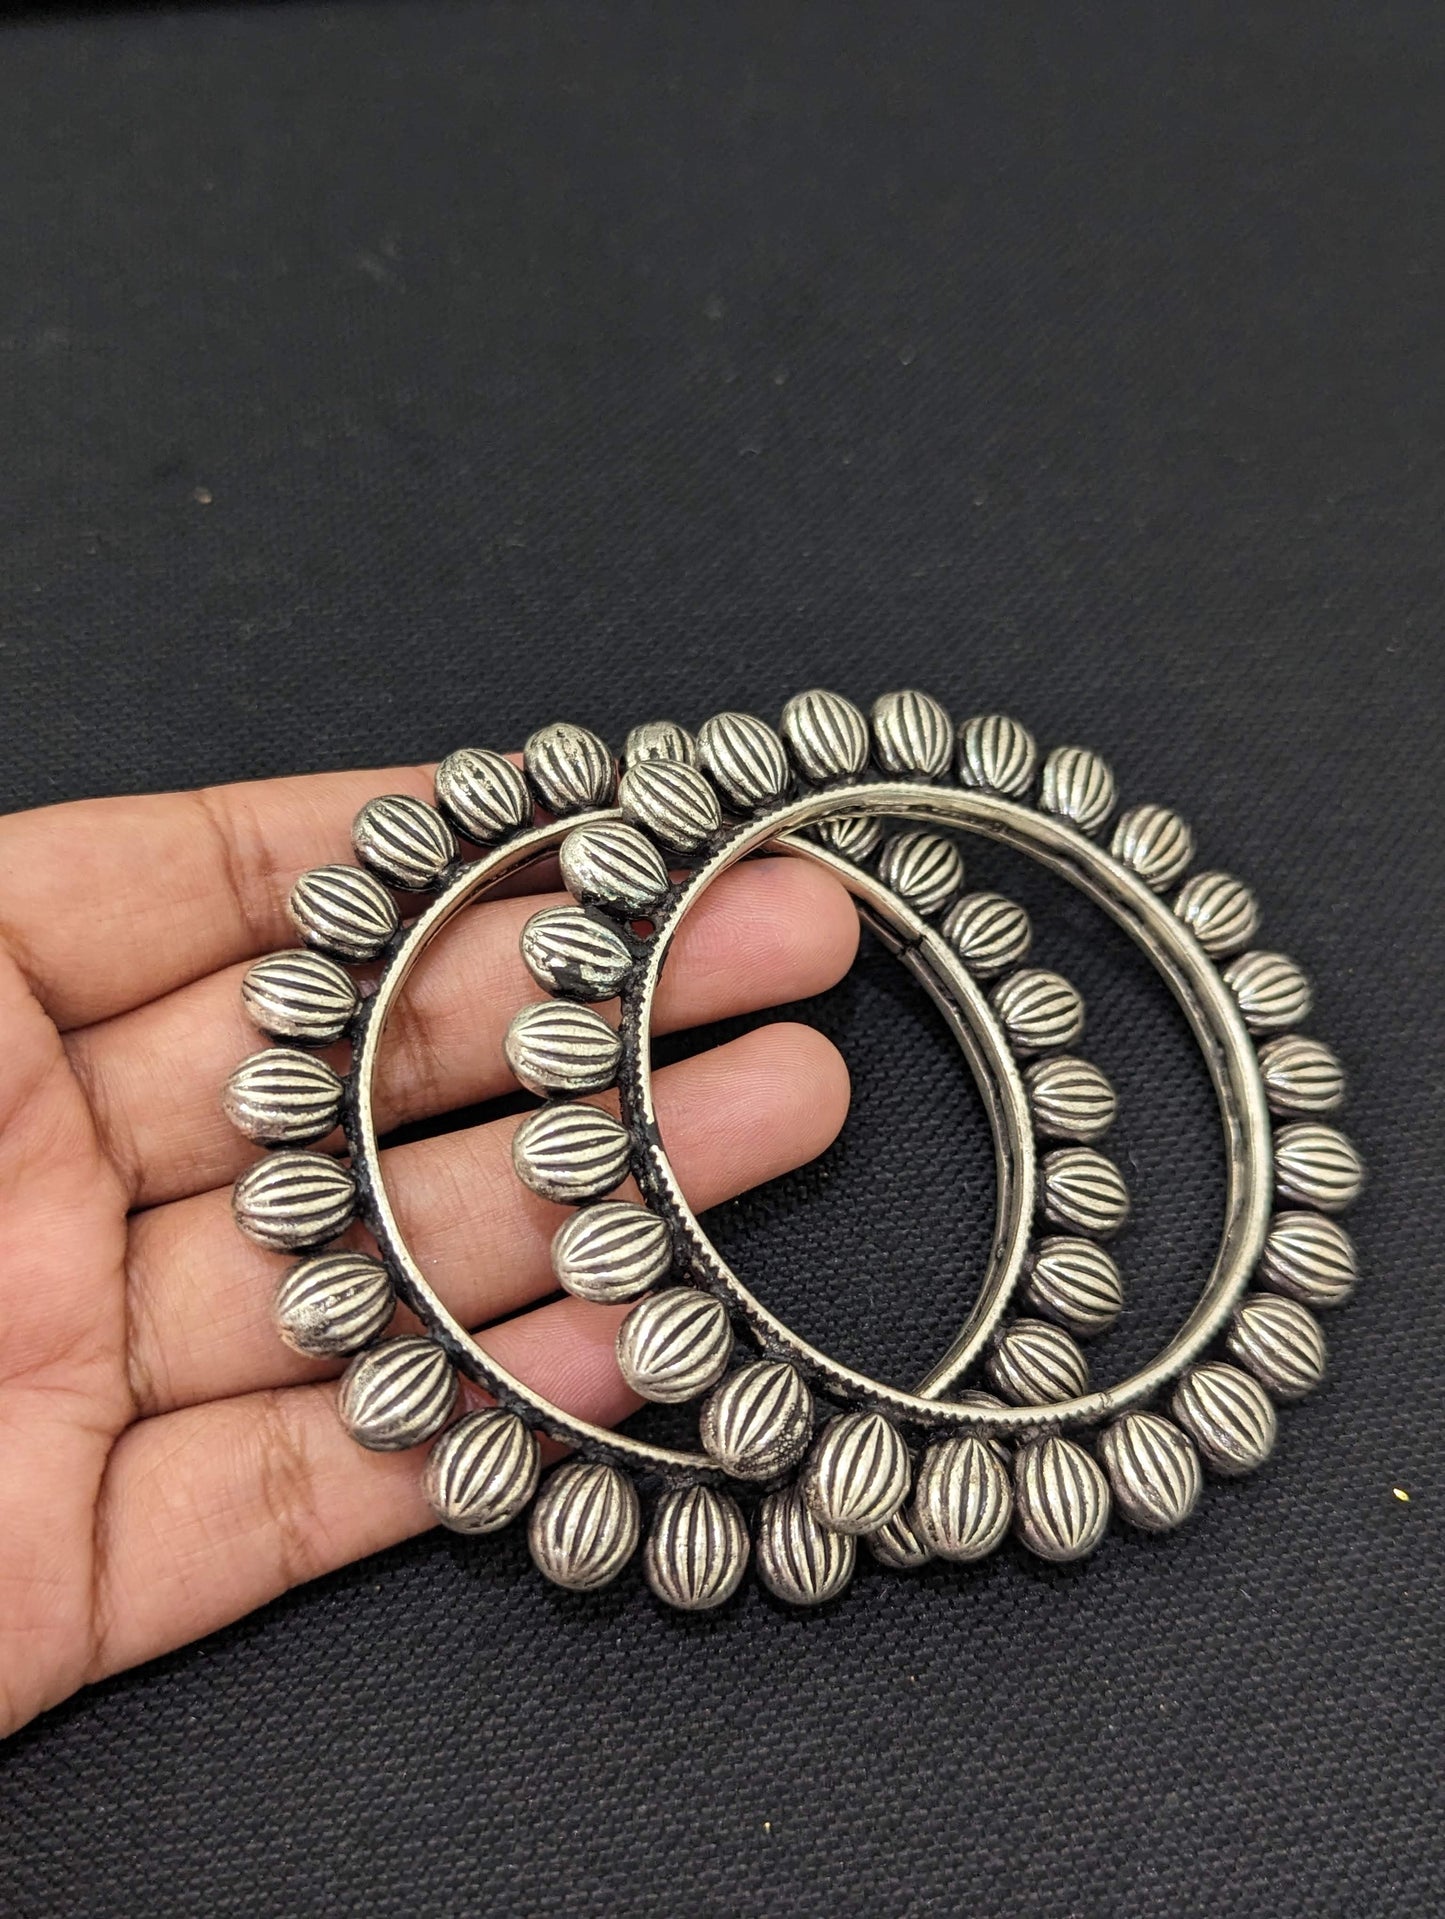 Oxidized silver pair bangles - Lined Oval design